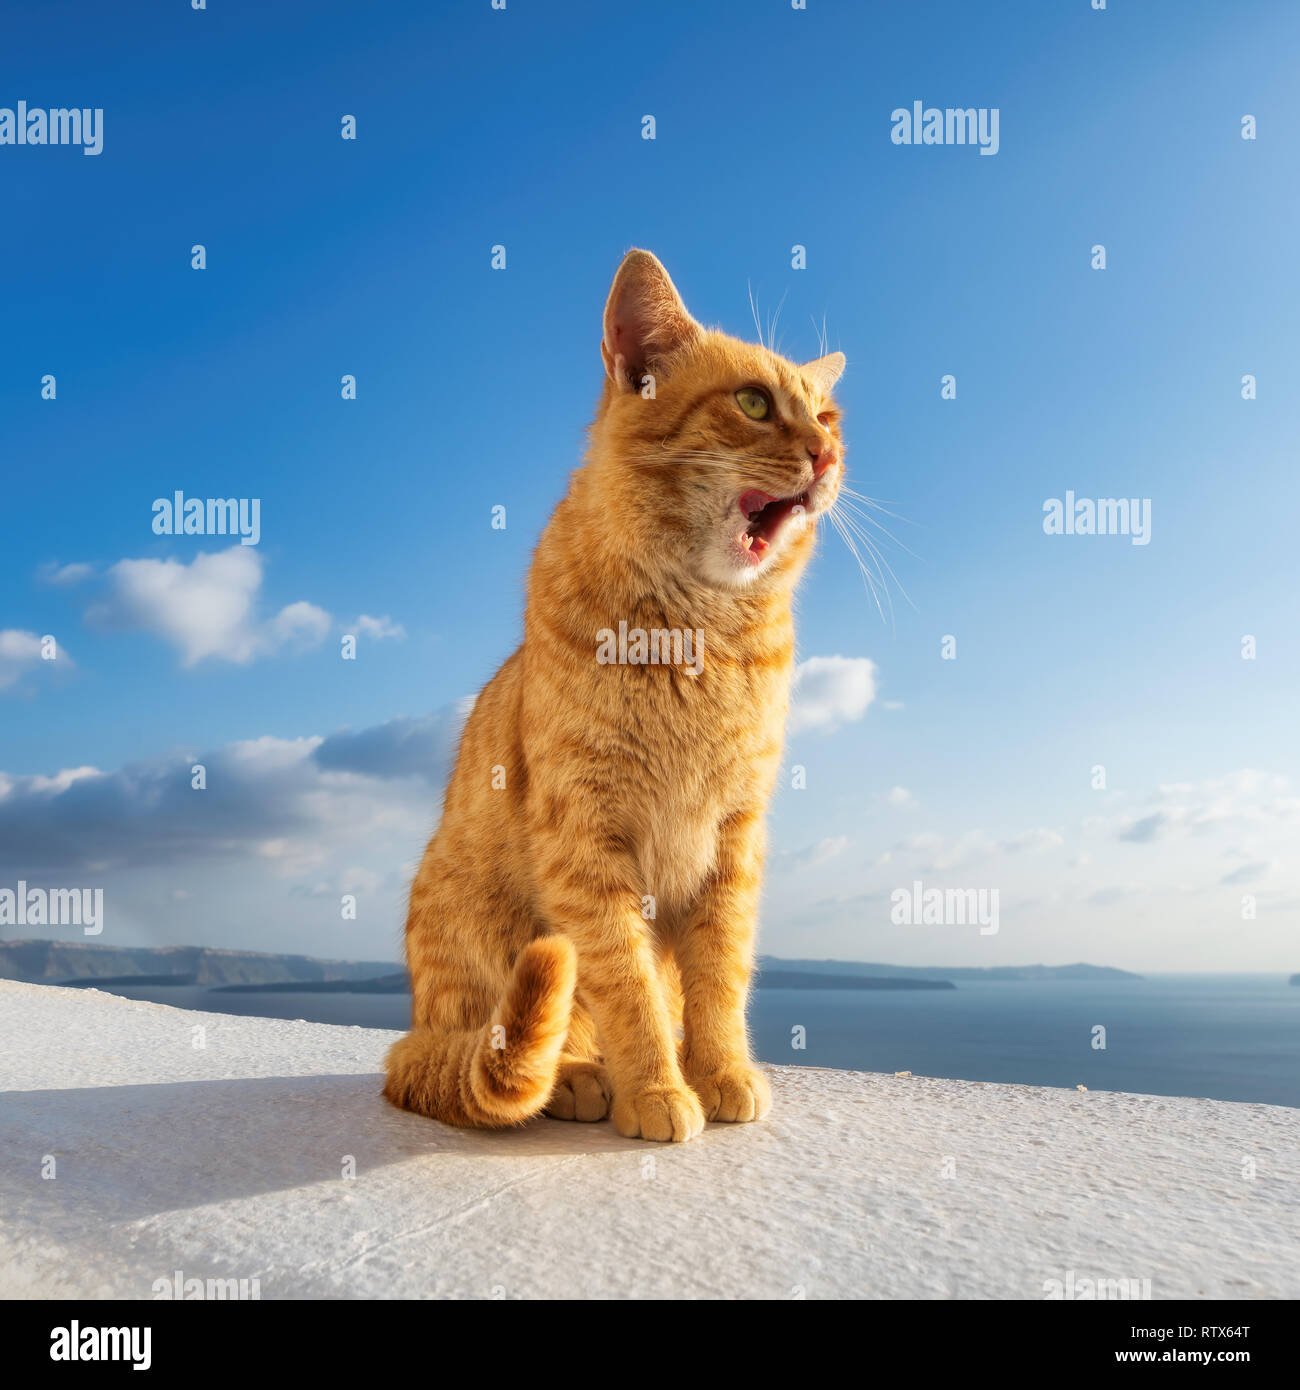 Cute ginger cat siting on balcony Stock Photo